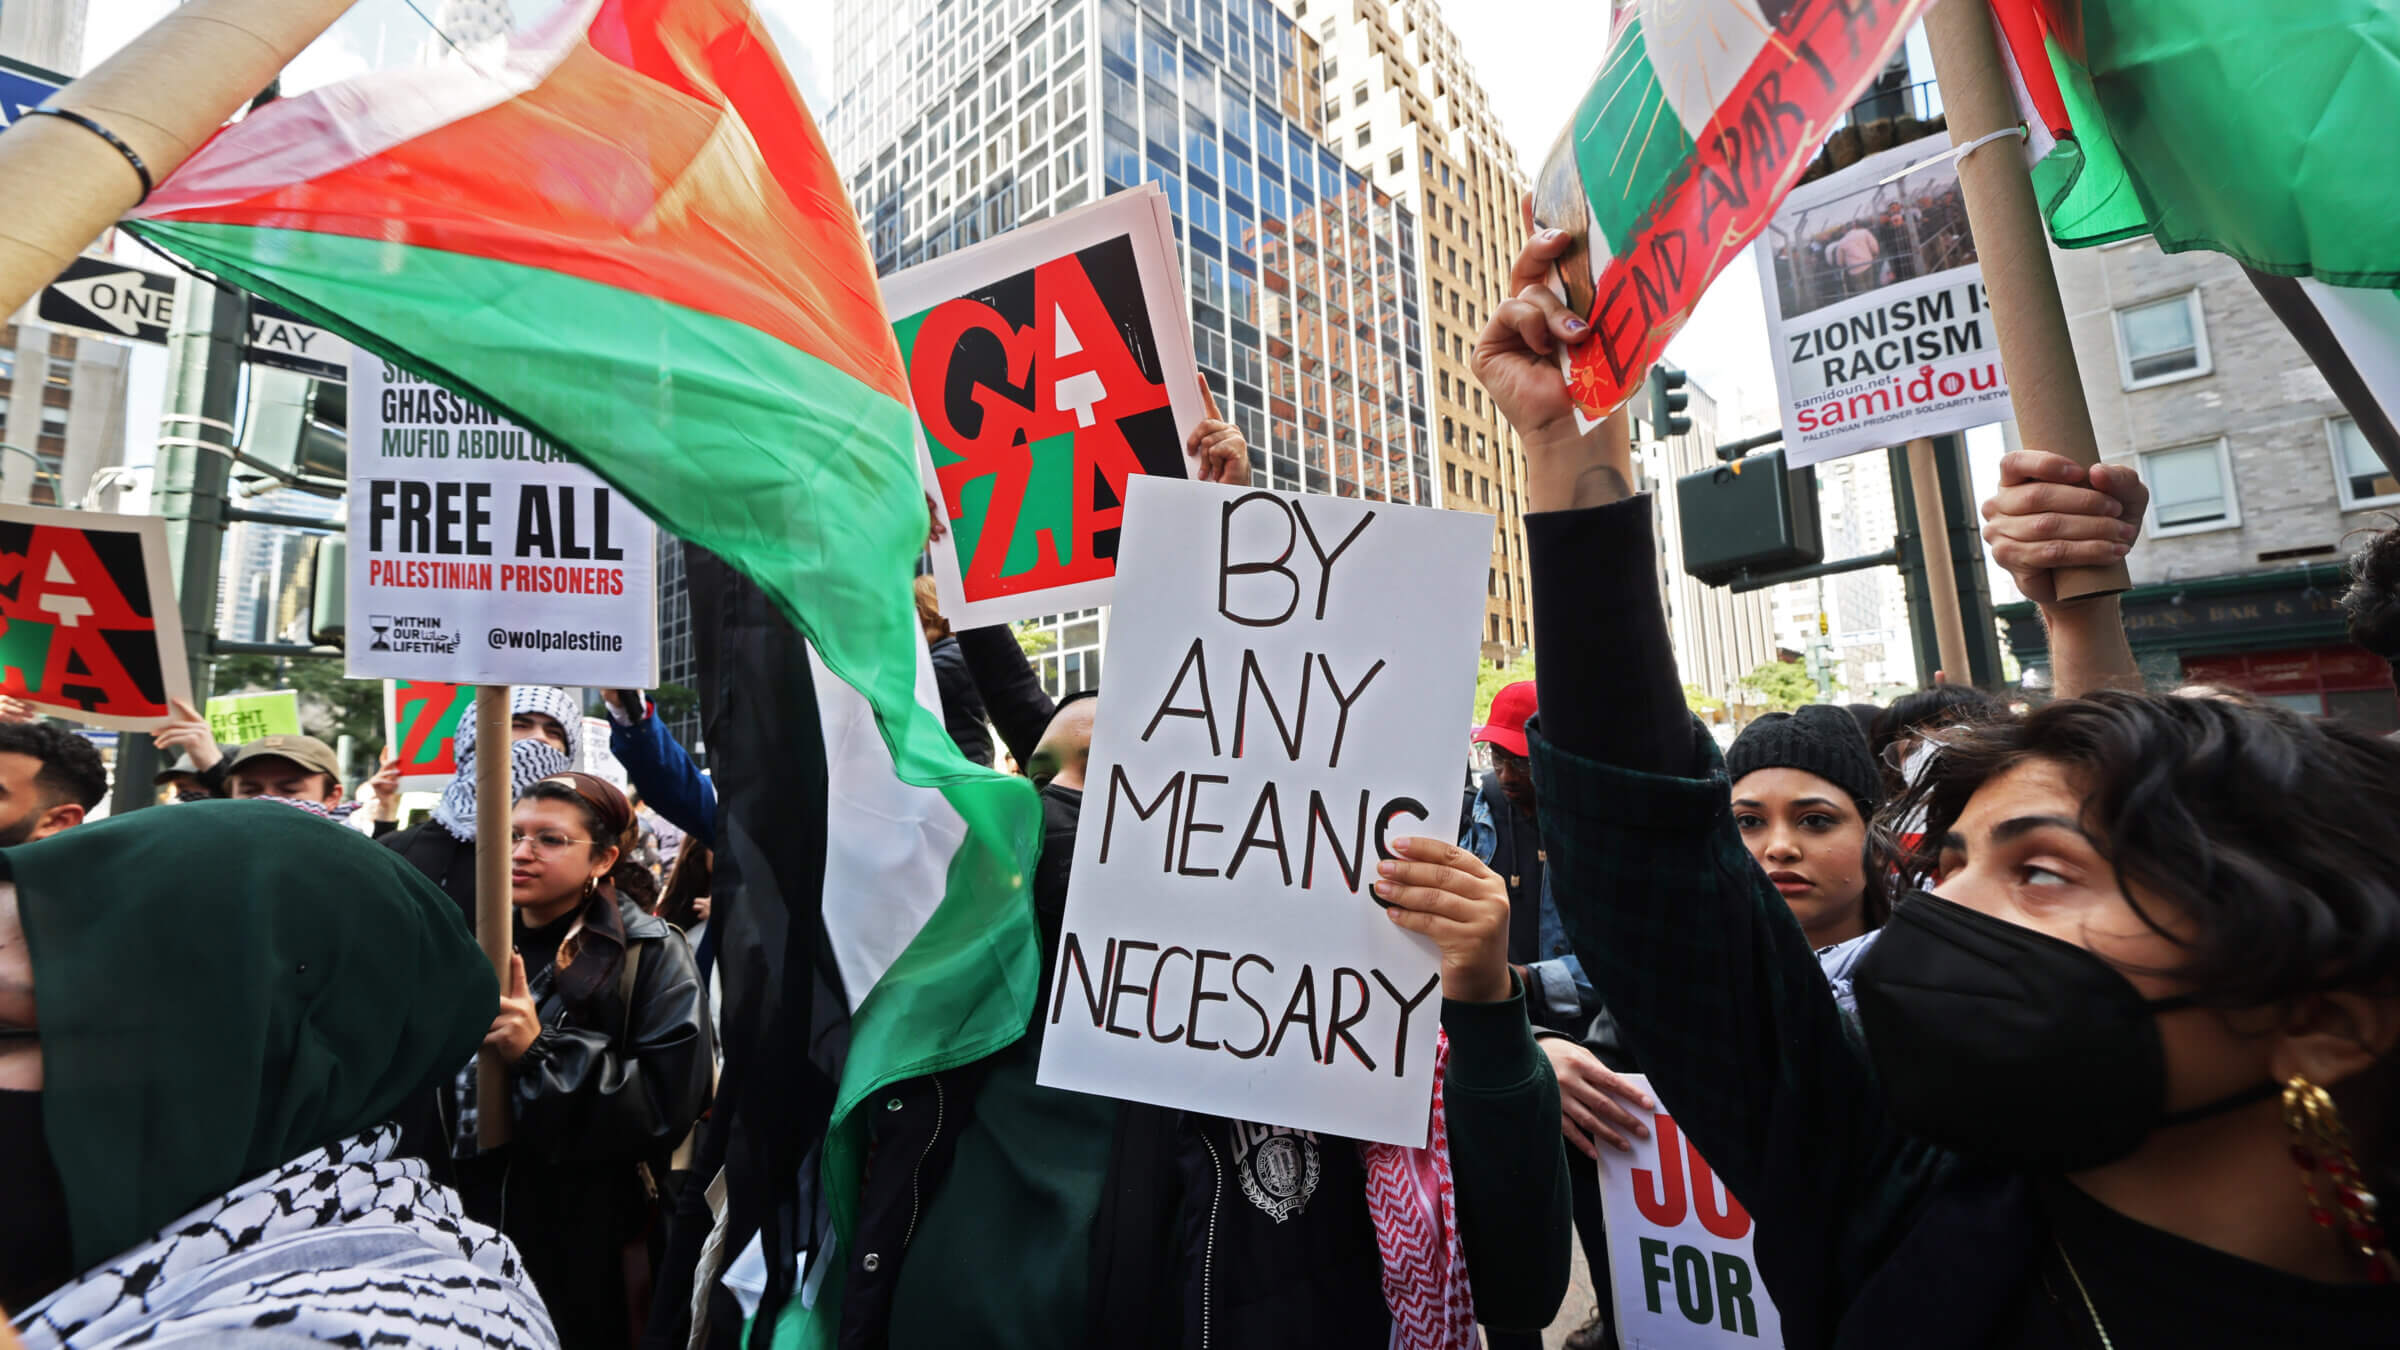 Demonstrators gather during the Emergency Rally for Gaza at the Consulate General of Israel Monday in New York City. Several Jewish organizations sponsored the event, which celebrated Saturday's attack by Hamas militants in Israel.